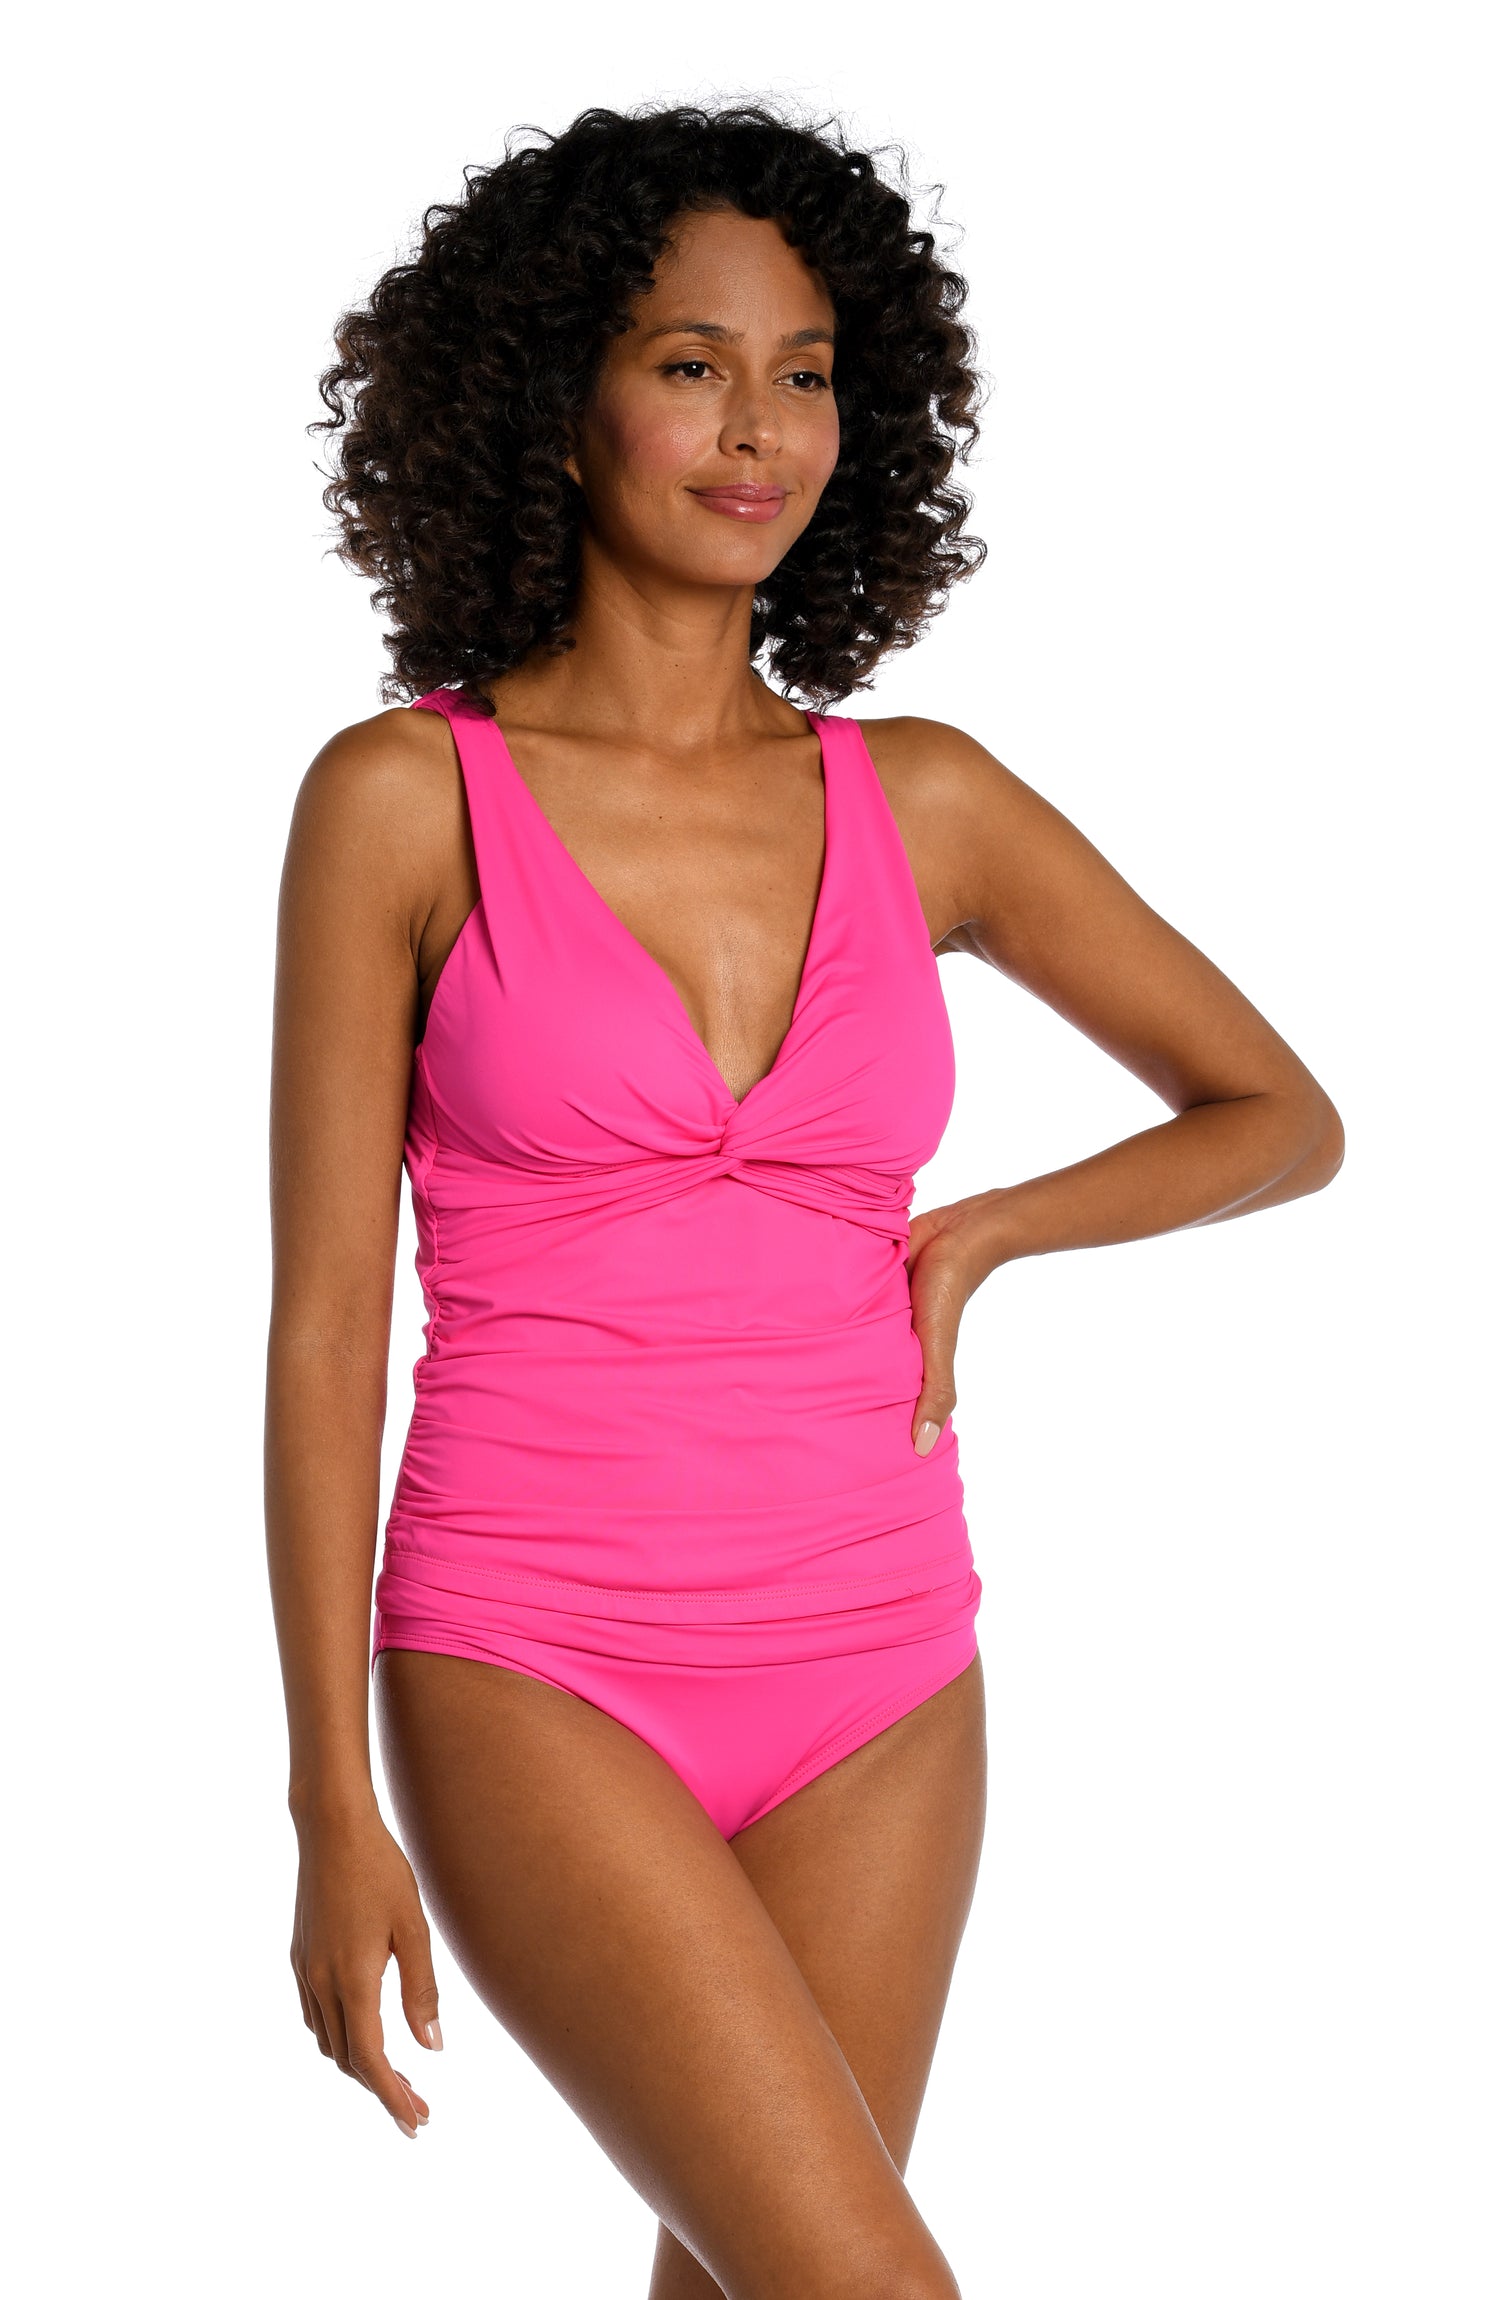 Model is wearing a pop pink colored tankini swimsuit top from our Best-Selling Island Goddess collection.